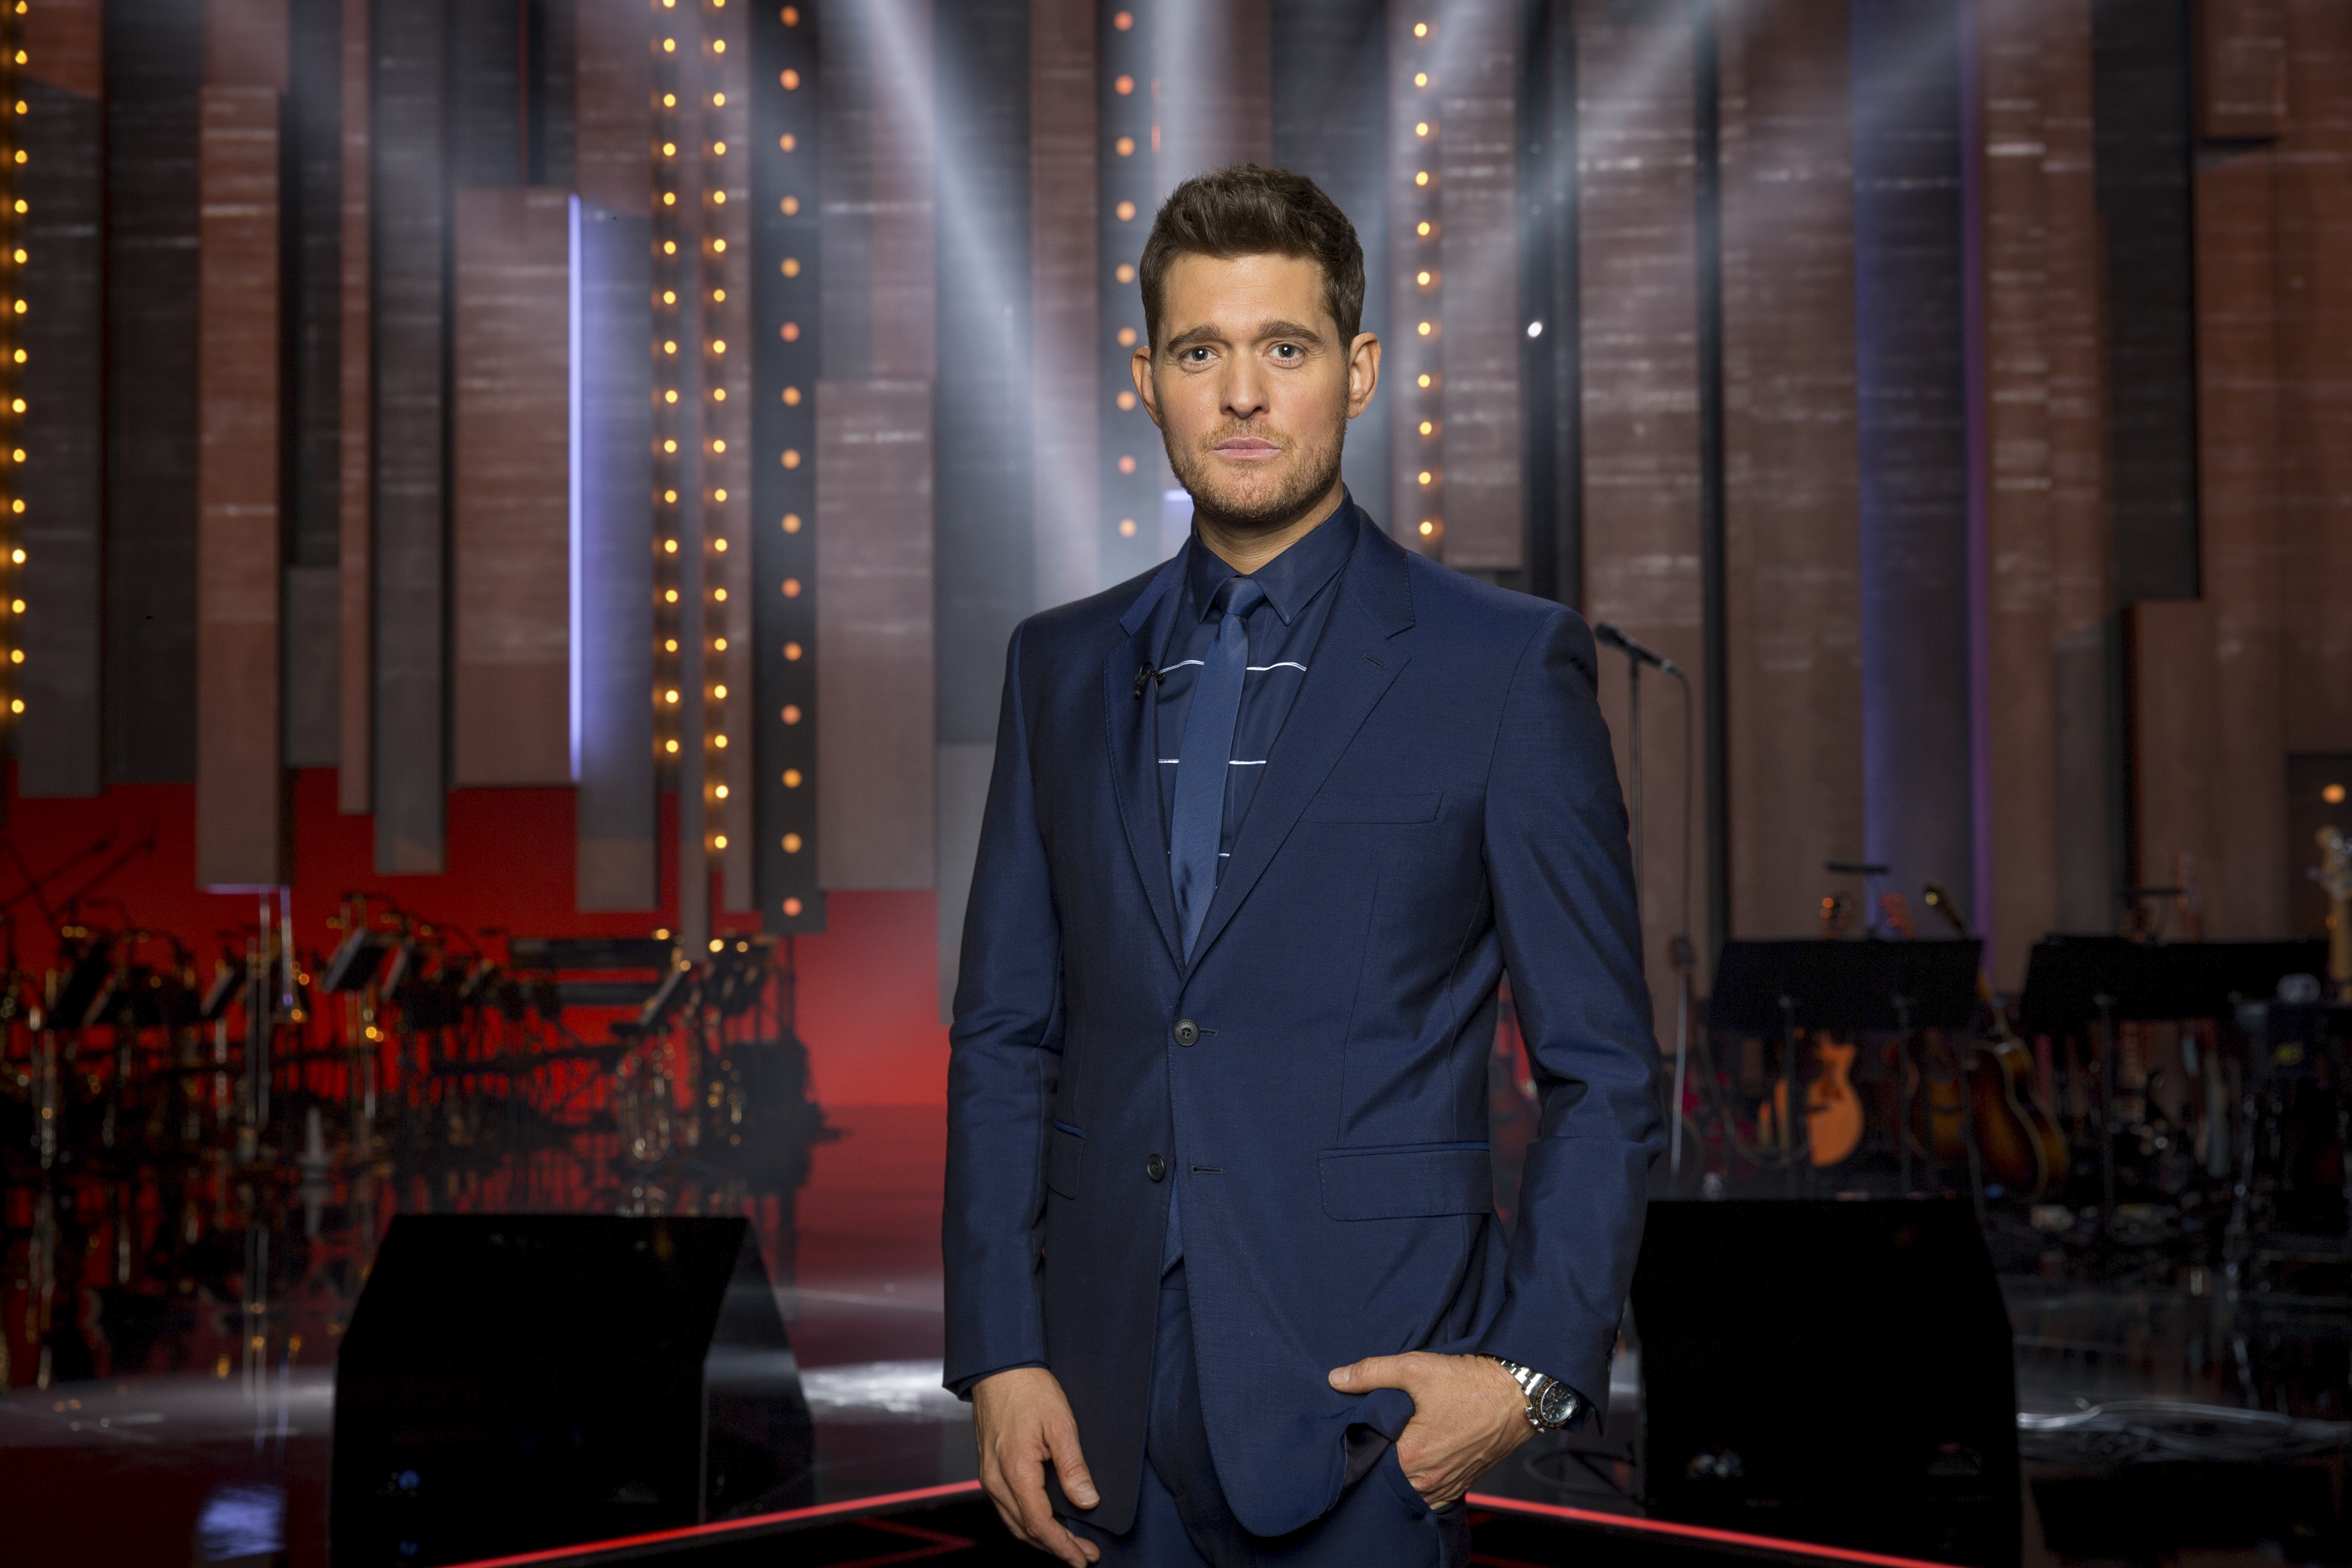 Buble at the BBC